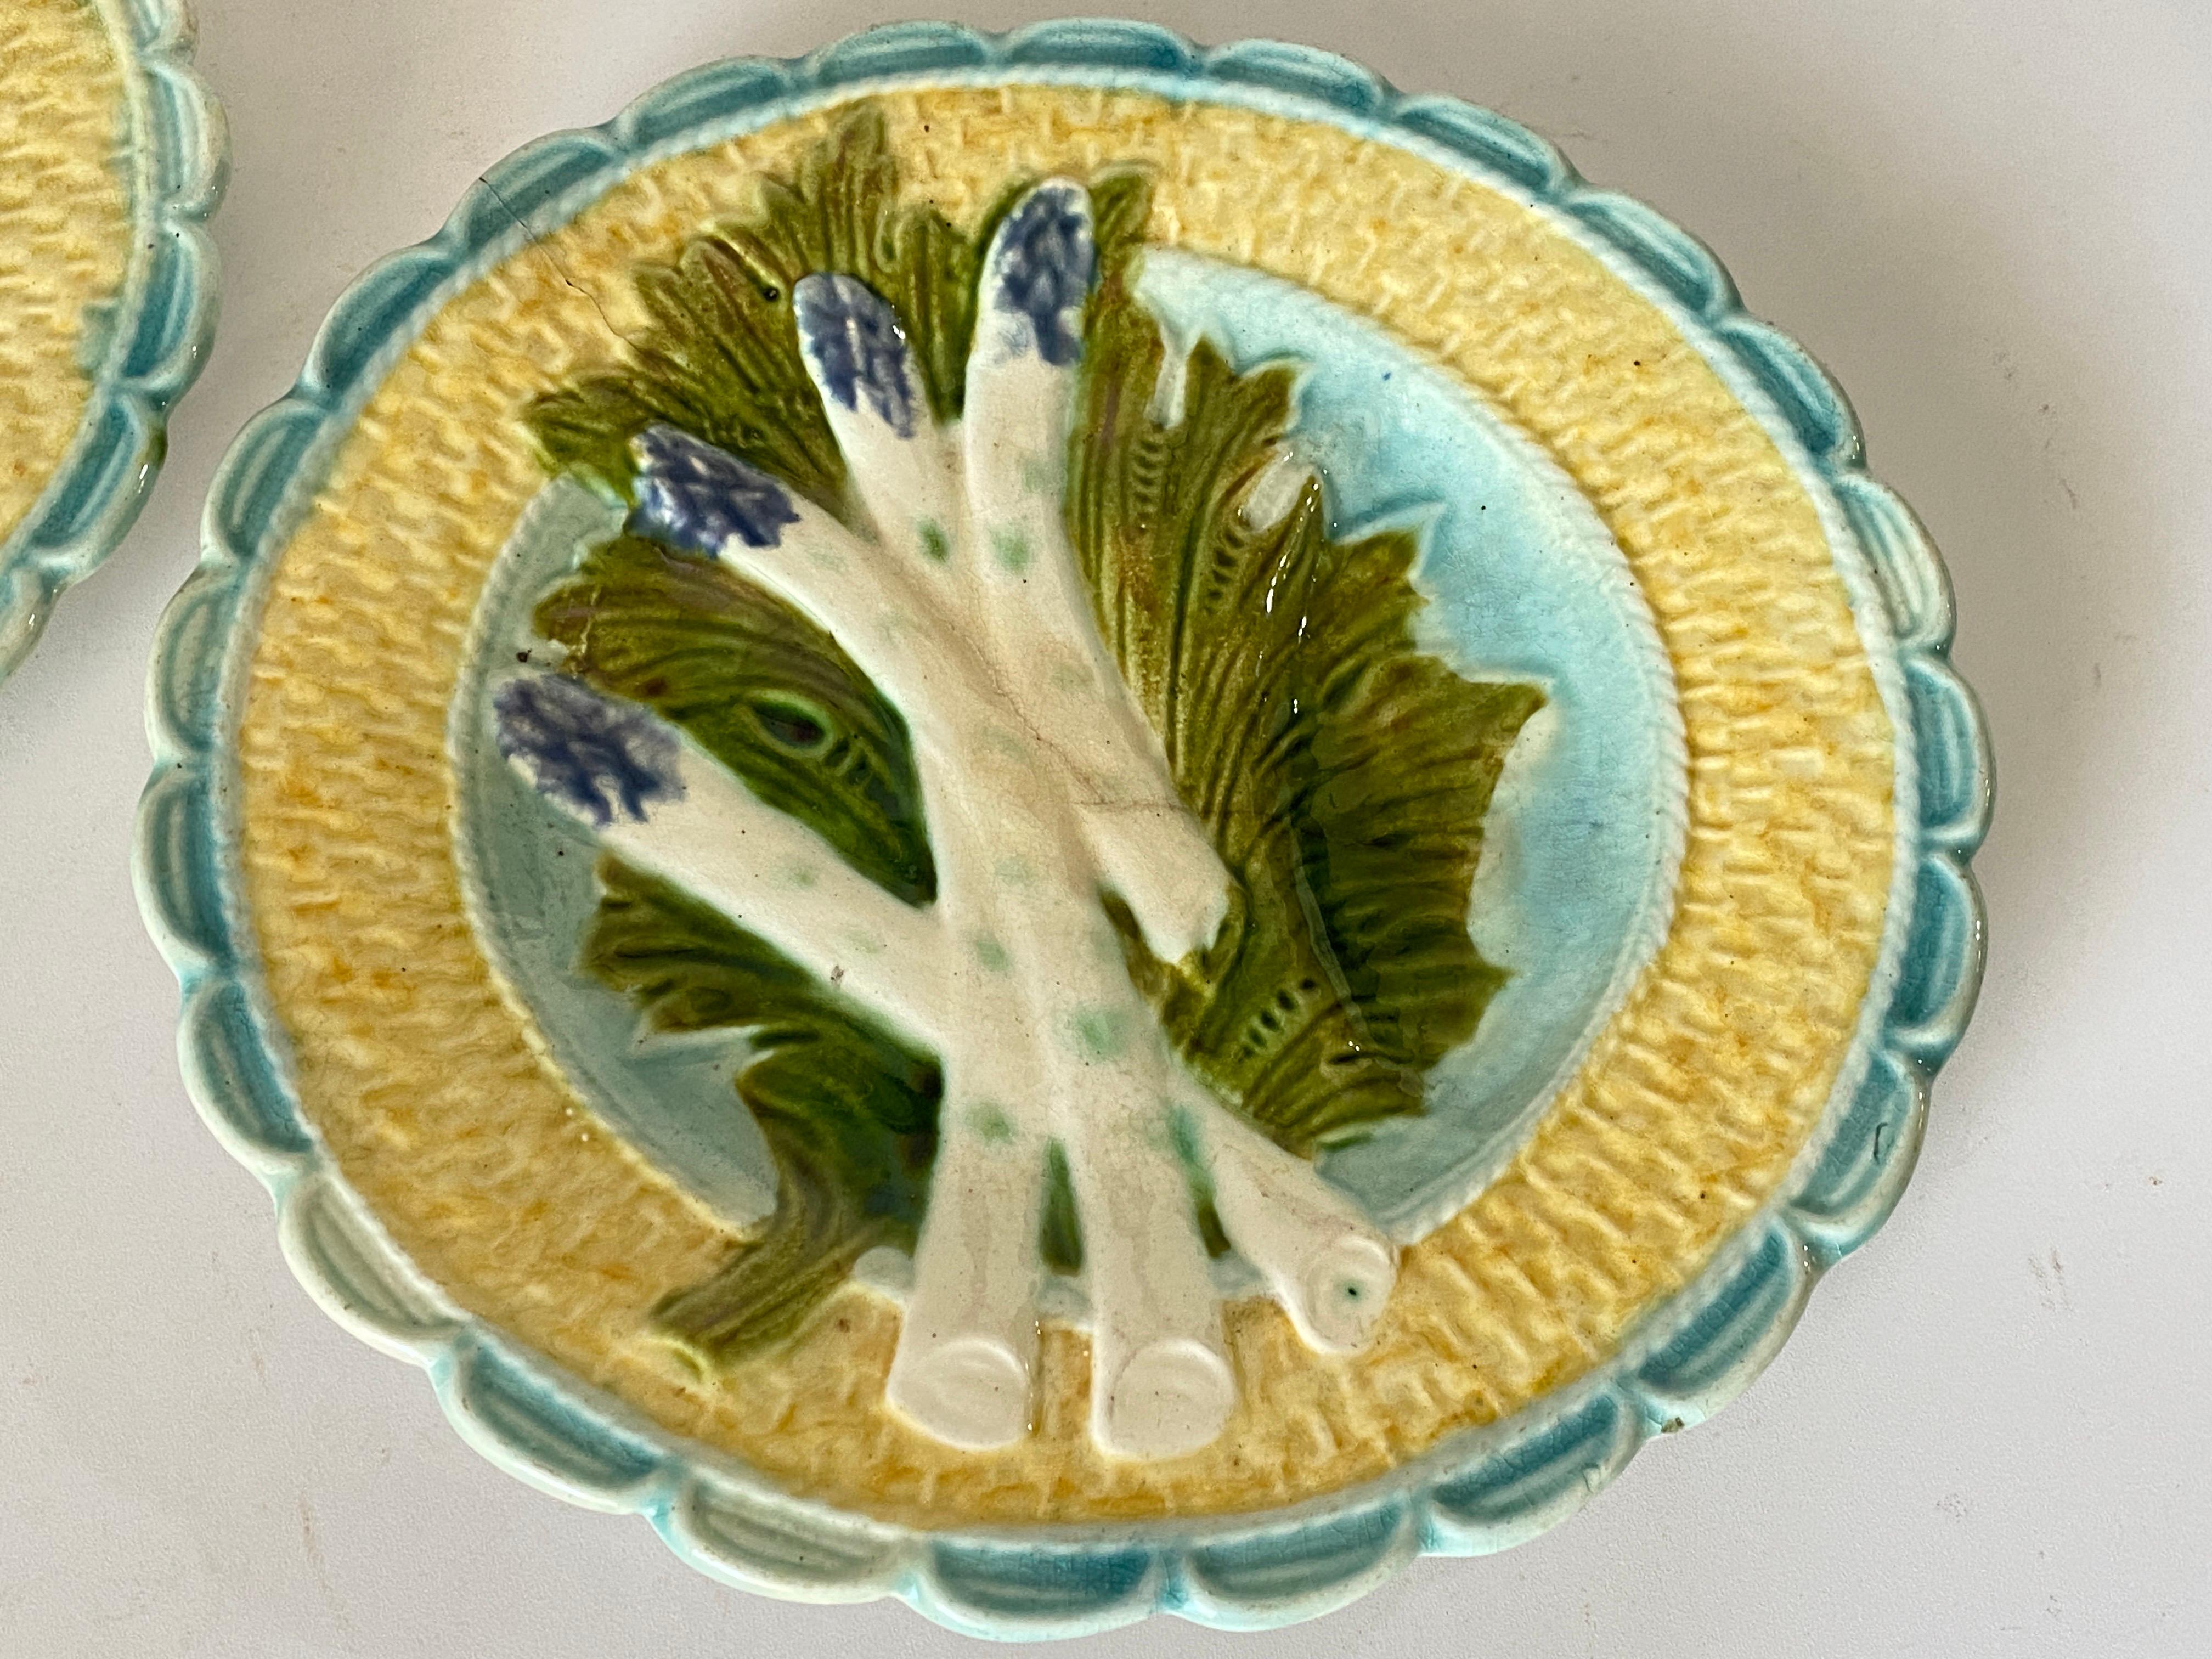 They are two Majolica ceramics, for the service of Asparagus. They were made in France Circa 1880 Their colors are white, green and blue.
They are serving dishes.


